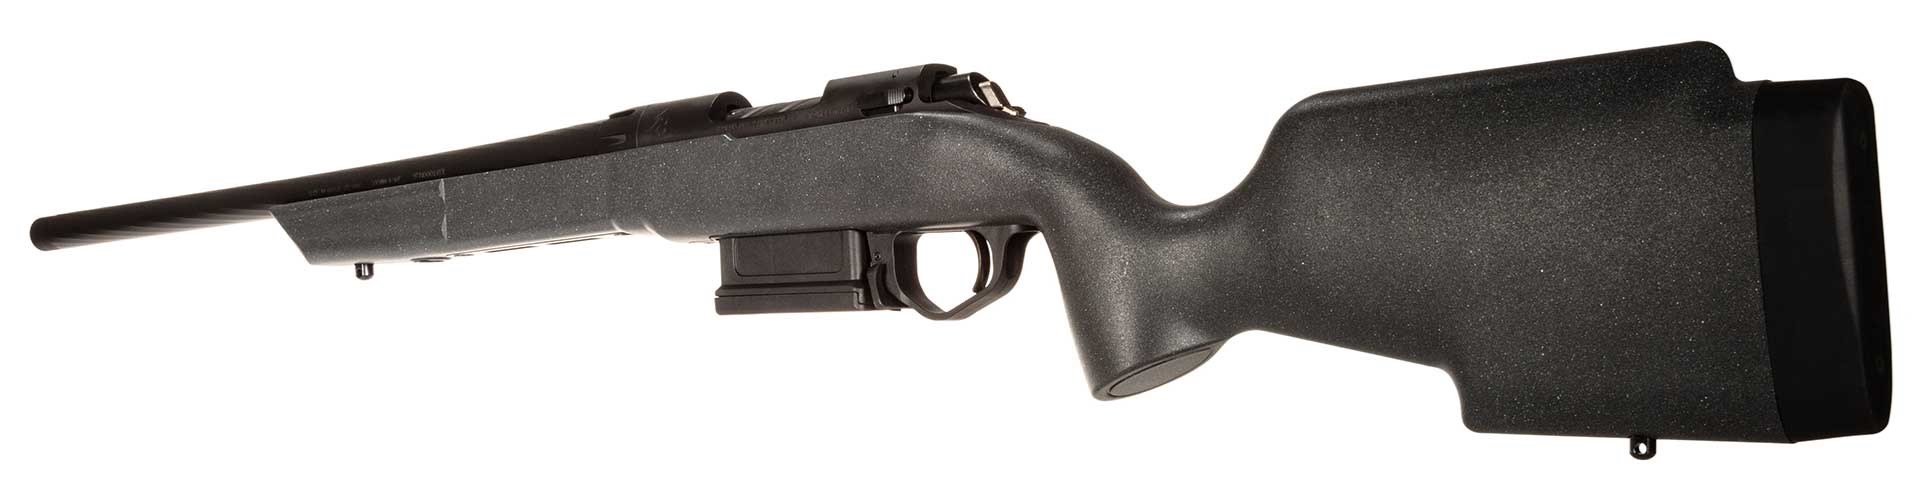 Left view of the Taurus Expedition bolt-action rifle's buttstock.